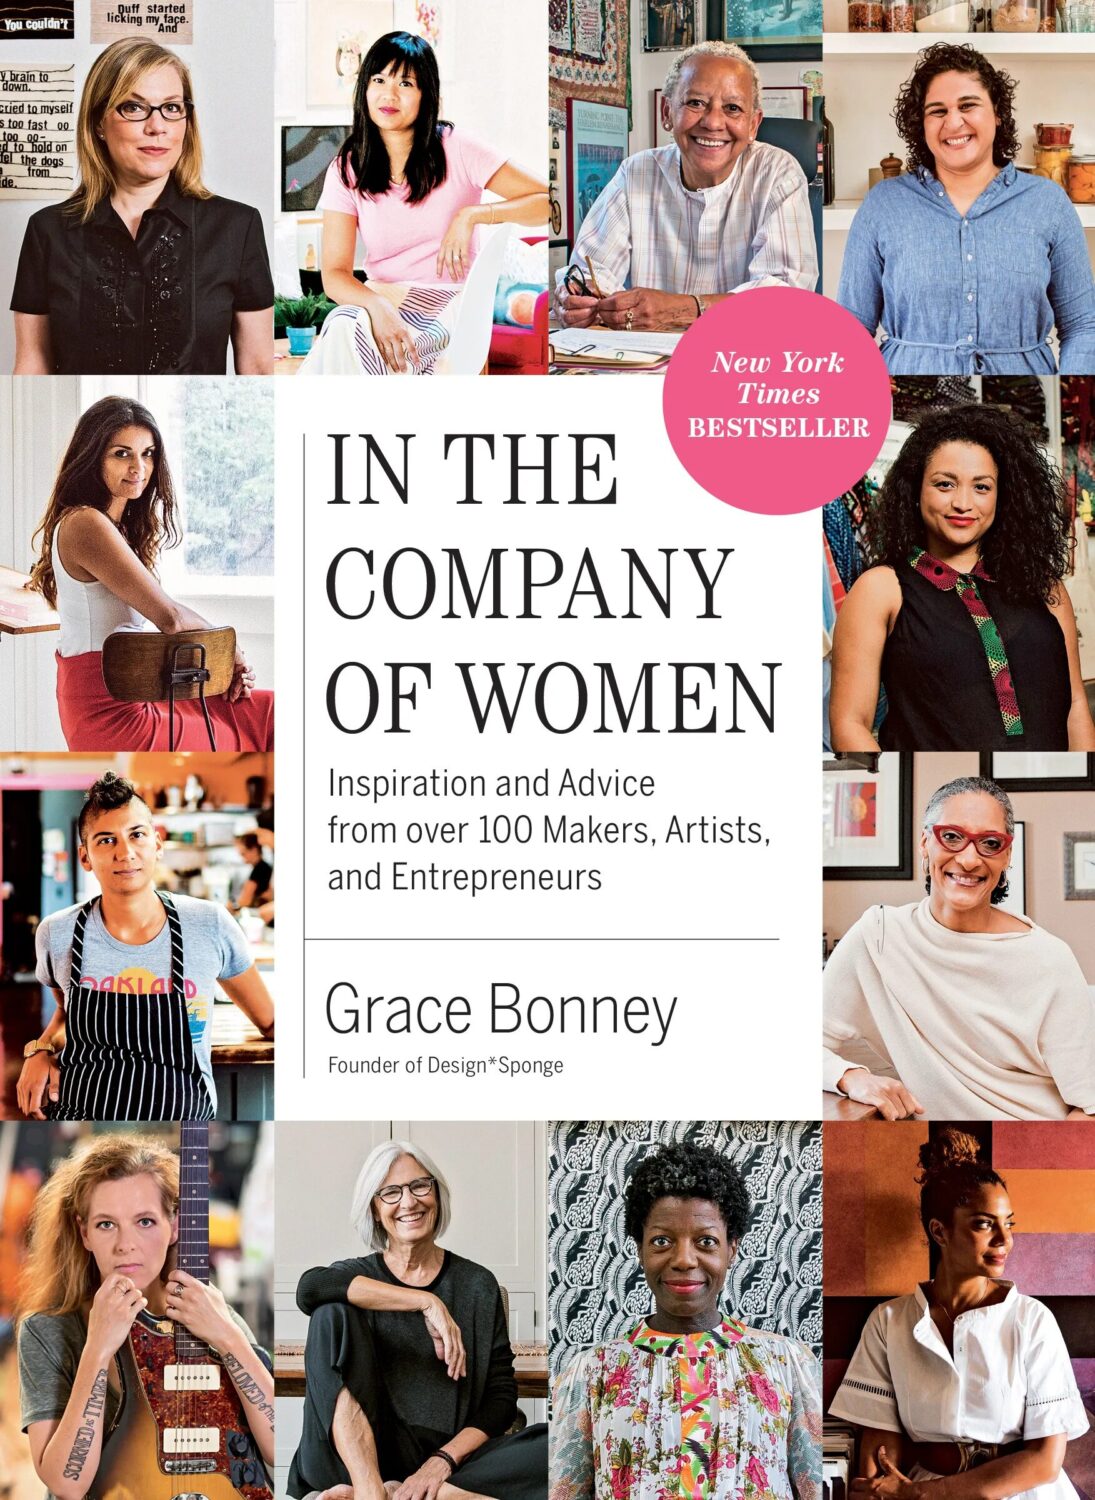 Logo de la startup In the Company of Women: Inspiration and Advice from over 100 Makers, Artists, and Entrepreneurs